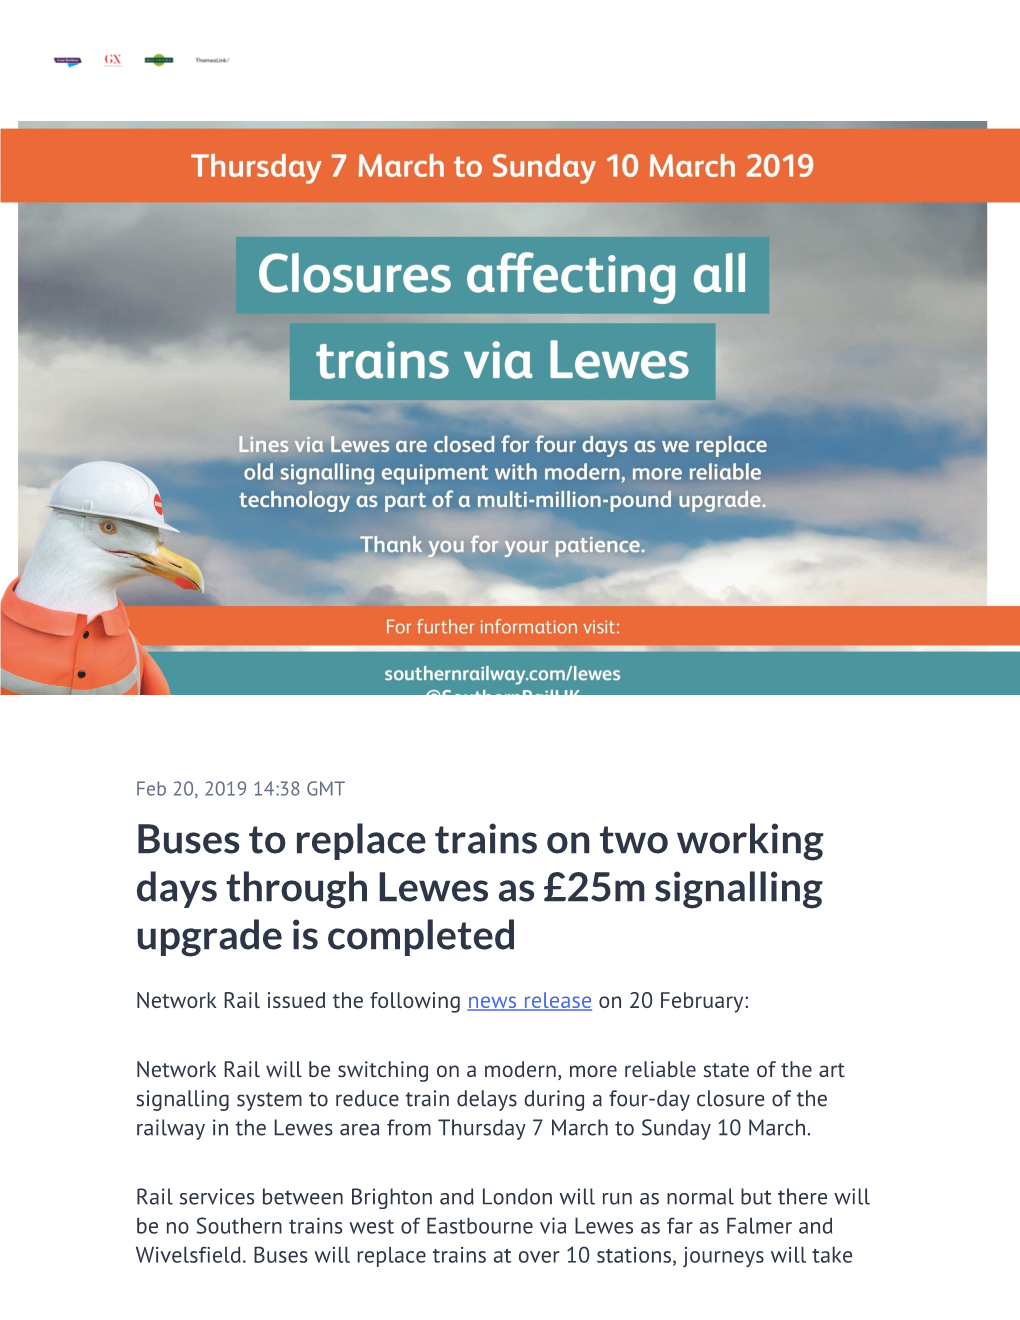 Buses to Replace Trains on Two Working Days Through Lewes As £25M Signalling Upgrade Is Completed